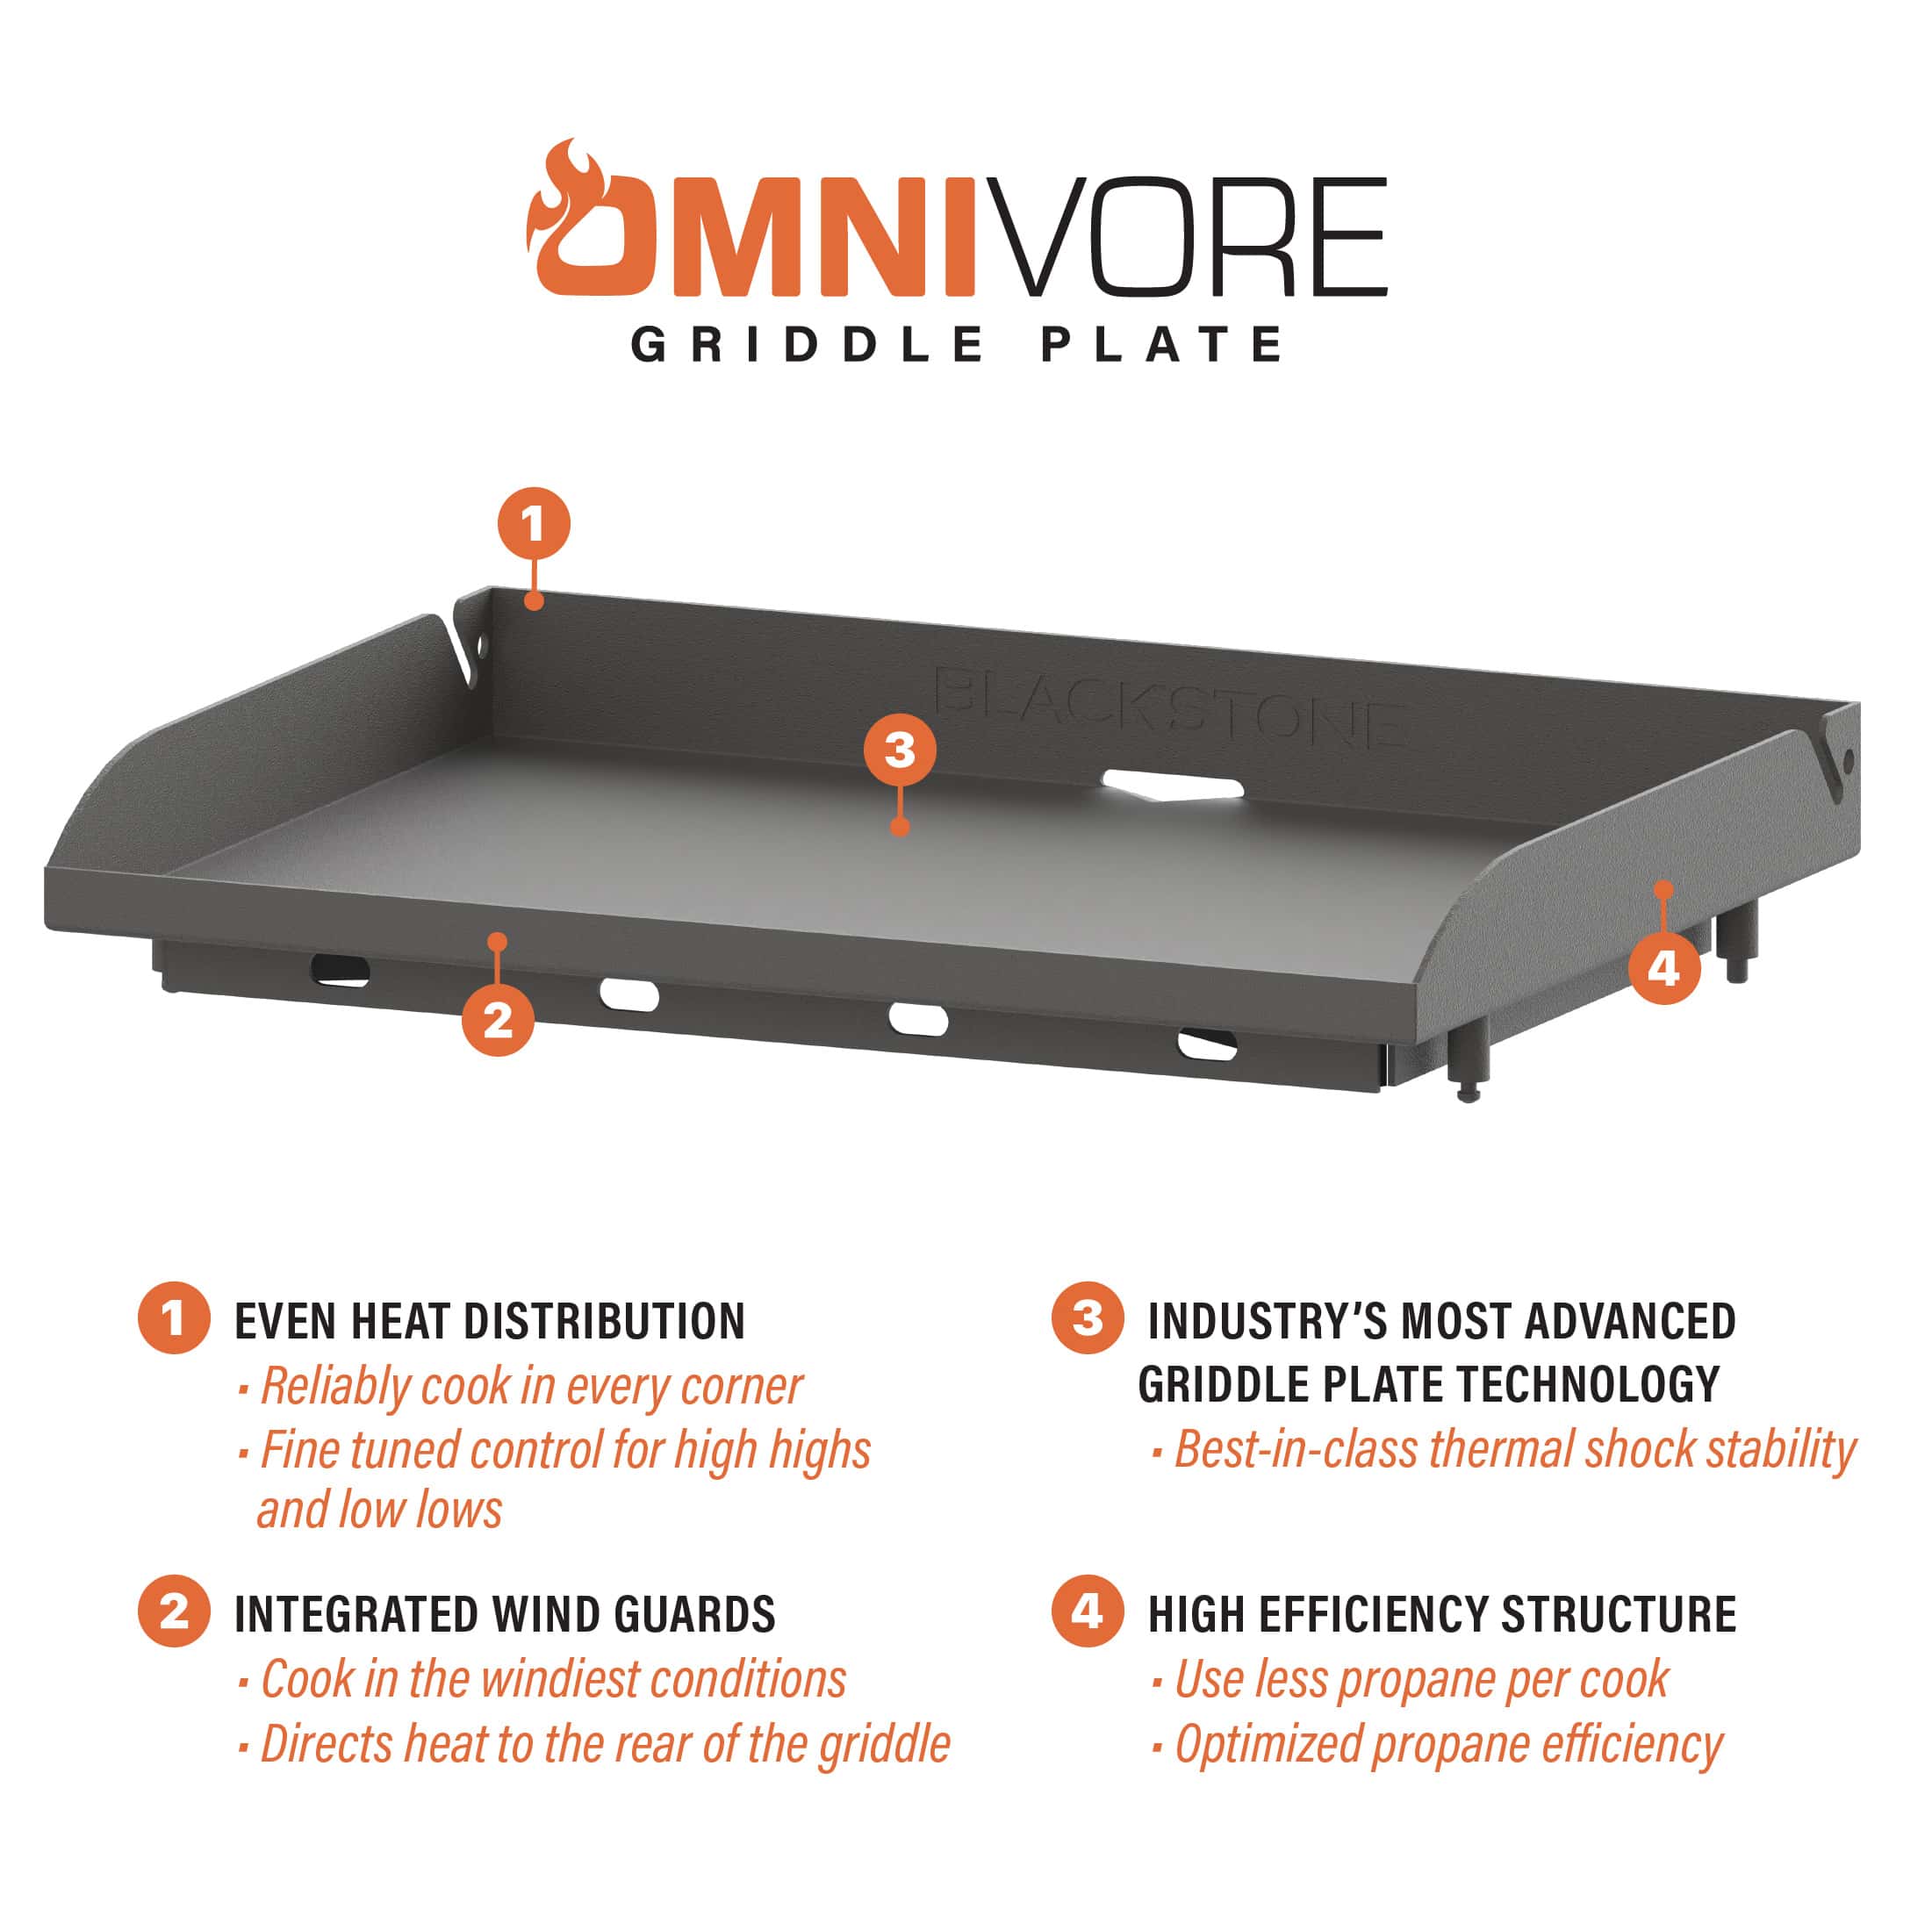 Omnivore griddle plate by Blackstone